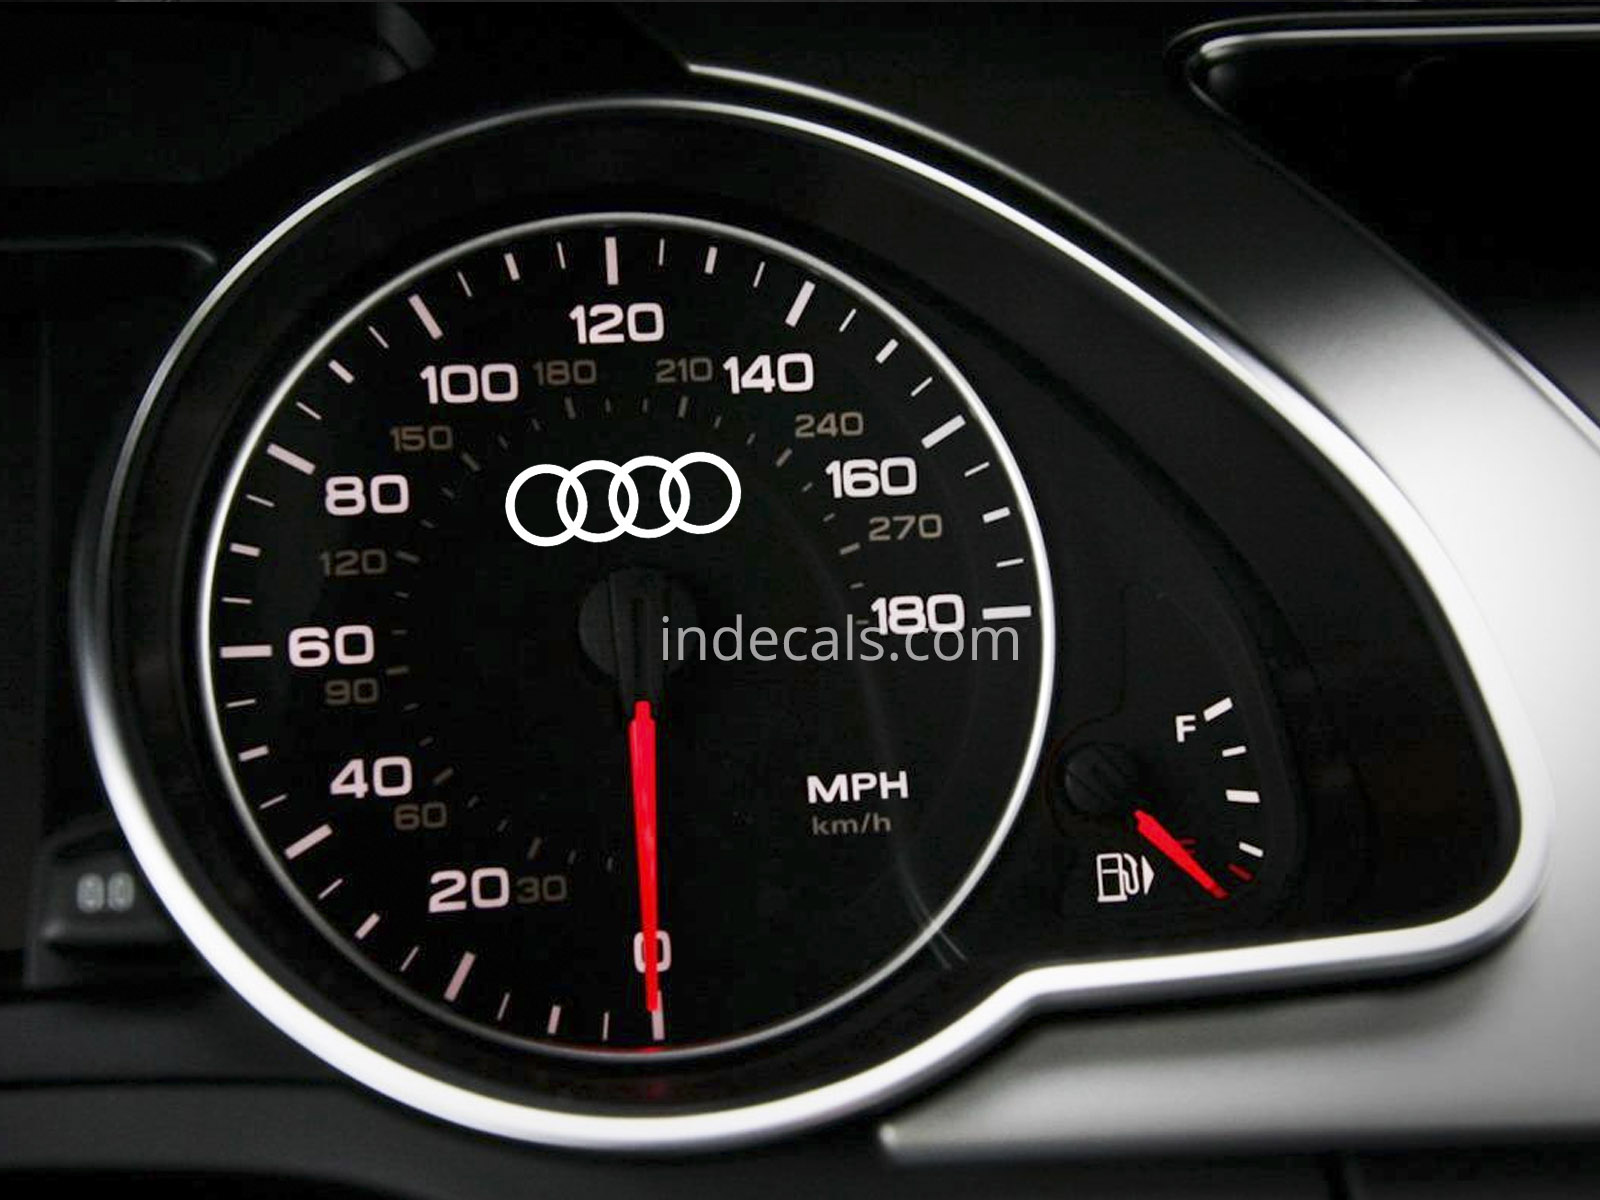 3 x Audi Rings Stickers for Speedometer - White